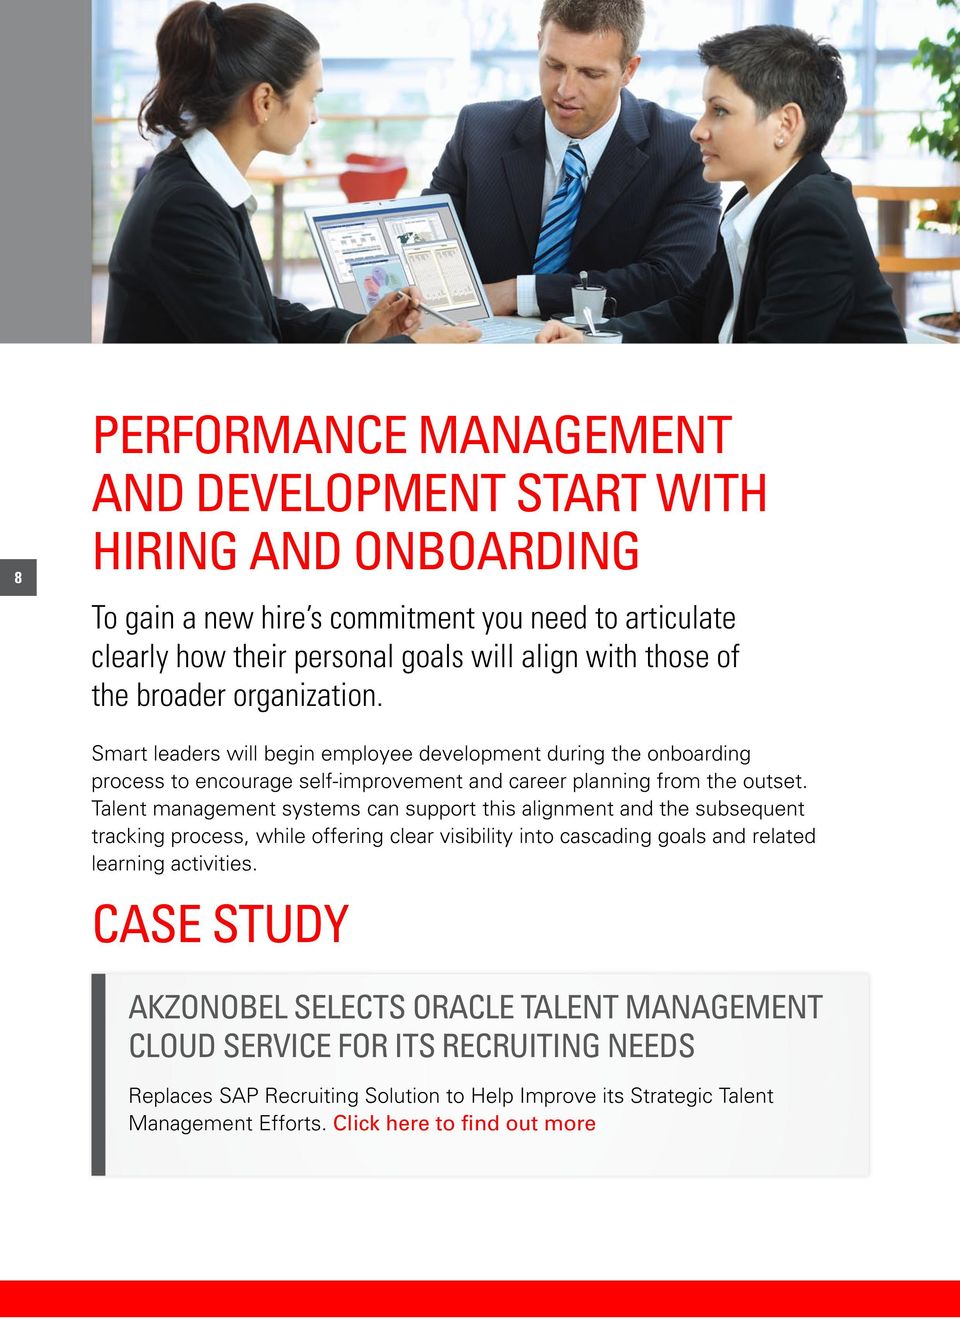 Talent management systems can support this alignment and the subsequent tracking process, while offering clear visibility into cascading goals and related learning activities.